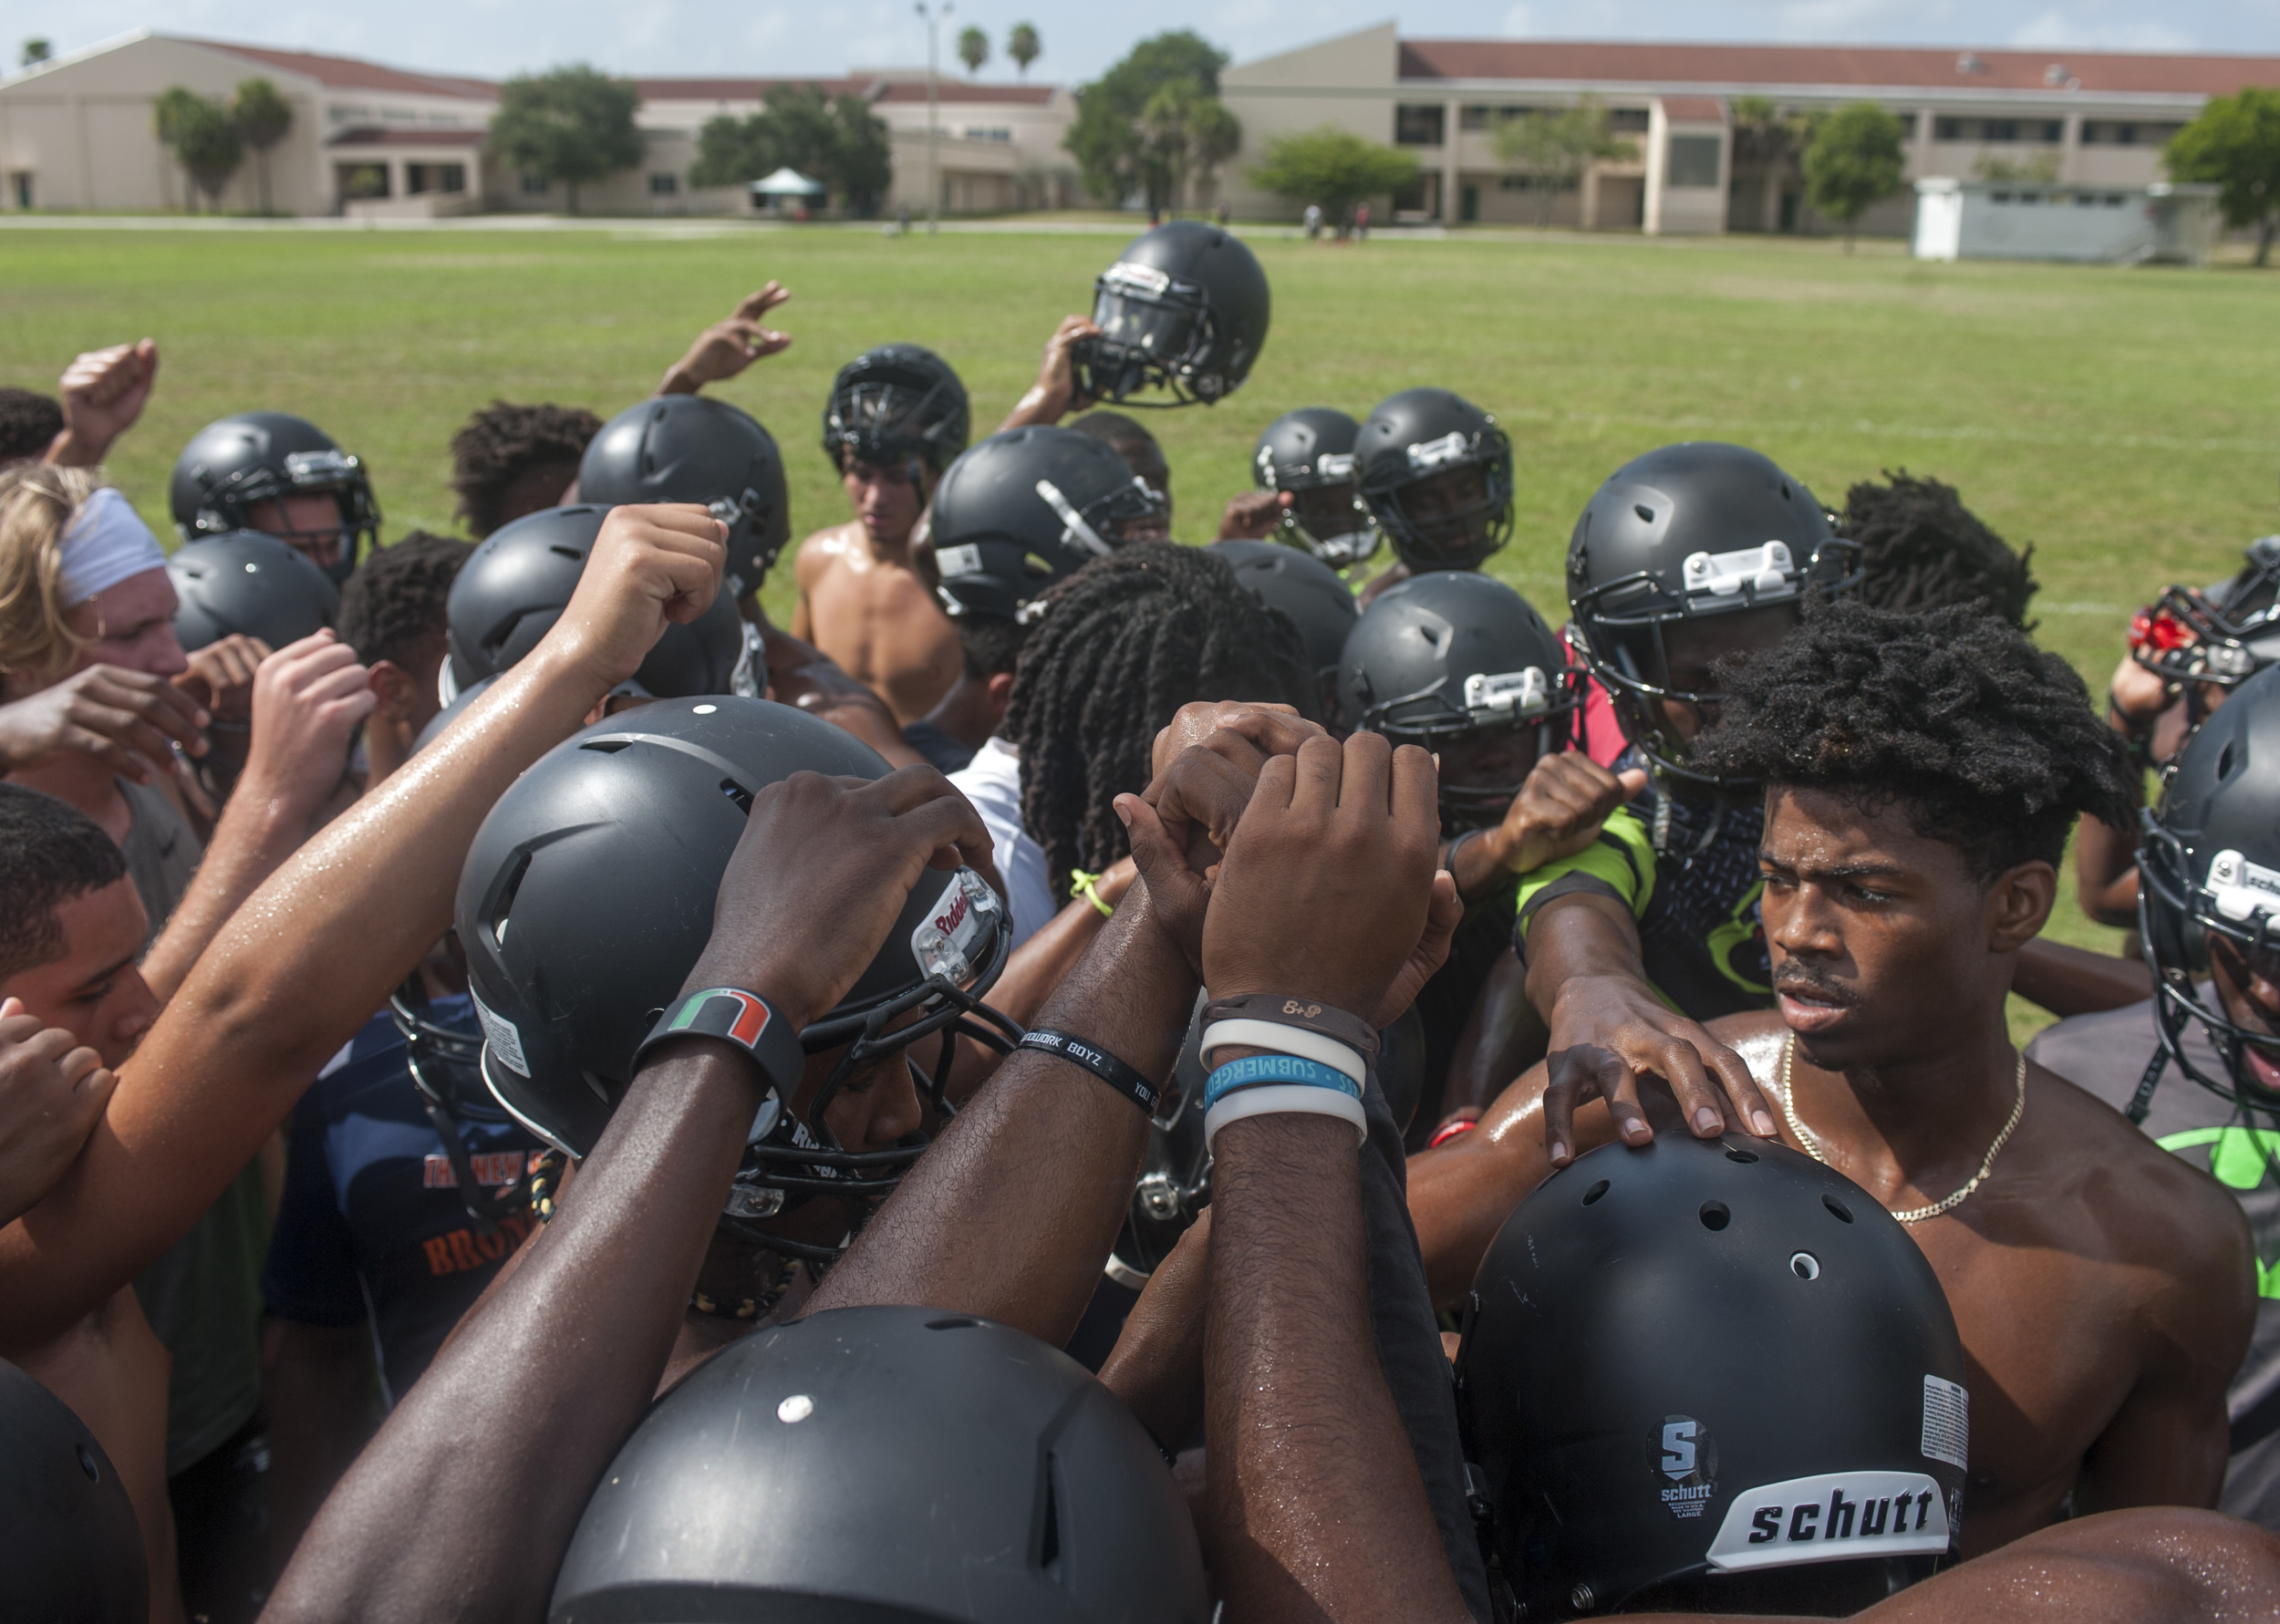  Flanagan high school senior Stanford Samuel III (right) leads in the breaking of practice after conditioning drills during the first practice of the high school football season at Flanagan High School on Monday, Aug. 1, 2016. The reigning state cham